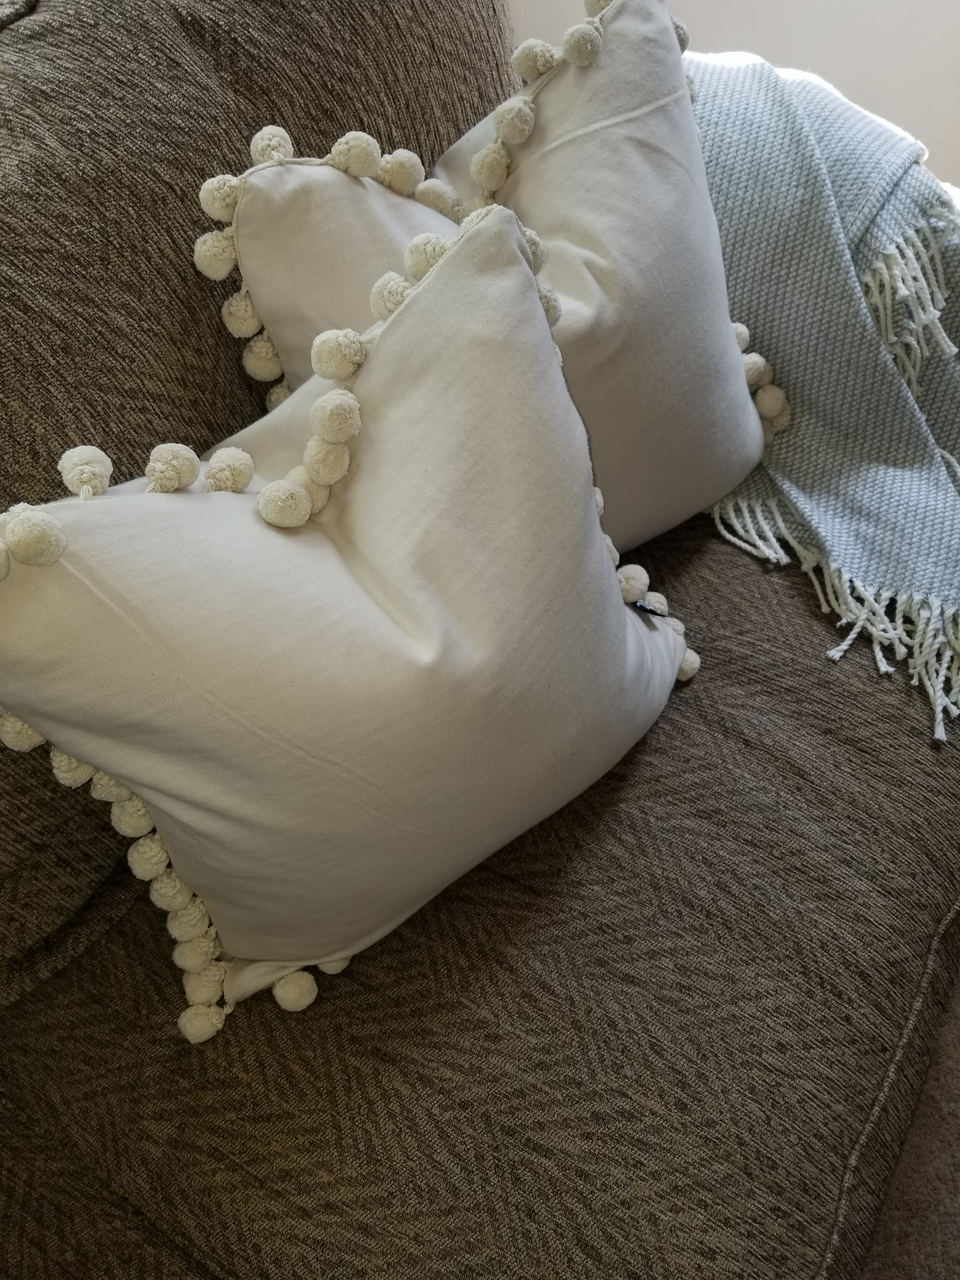 18 x 18 cream pom pom pillow covers on brown couch with beige throw cover top view